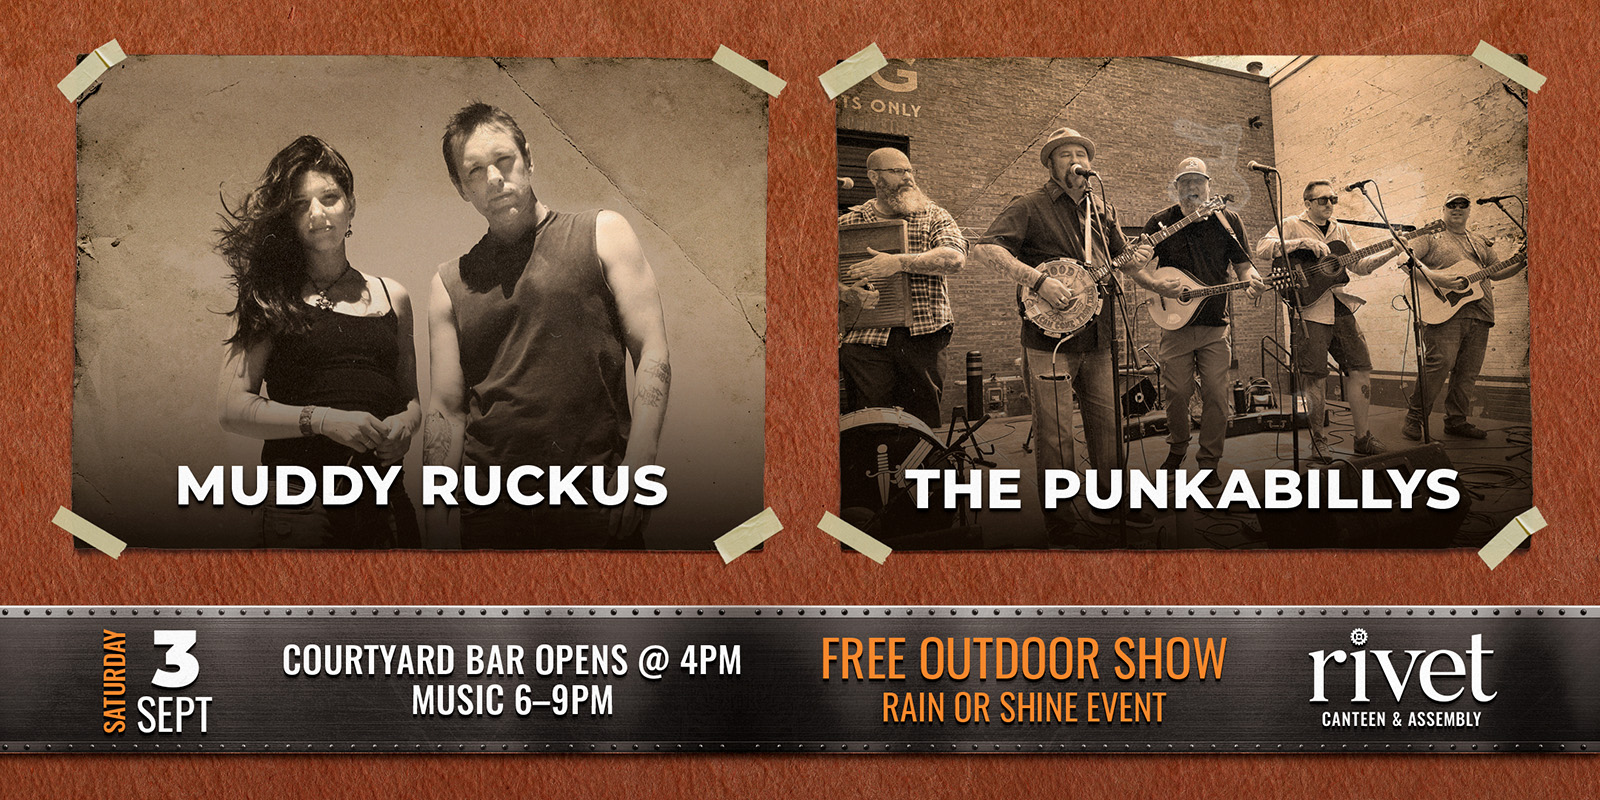 Free outdoor show at Rivet: Canteen & Assembly with Muddy Ruckus and The Punkabillys on Saturday, September 3rd, 2022. Rain or shine event!